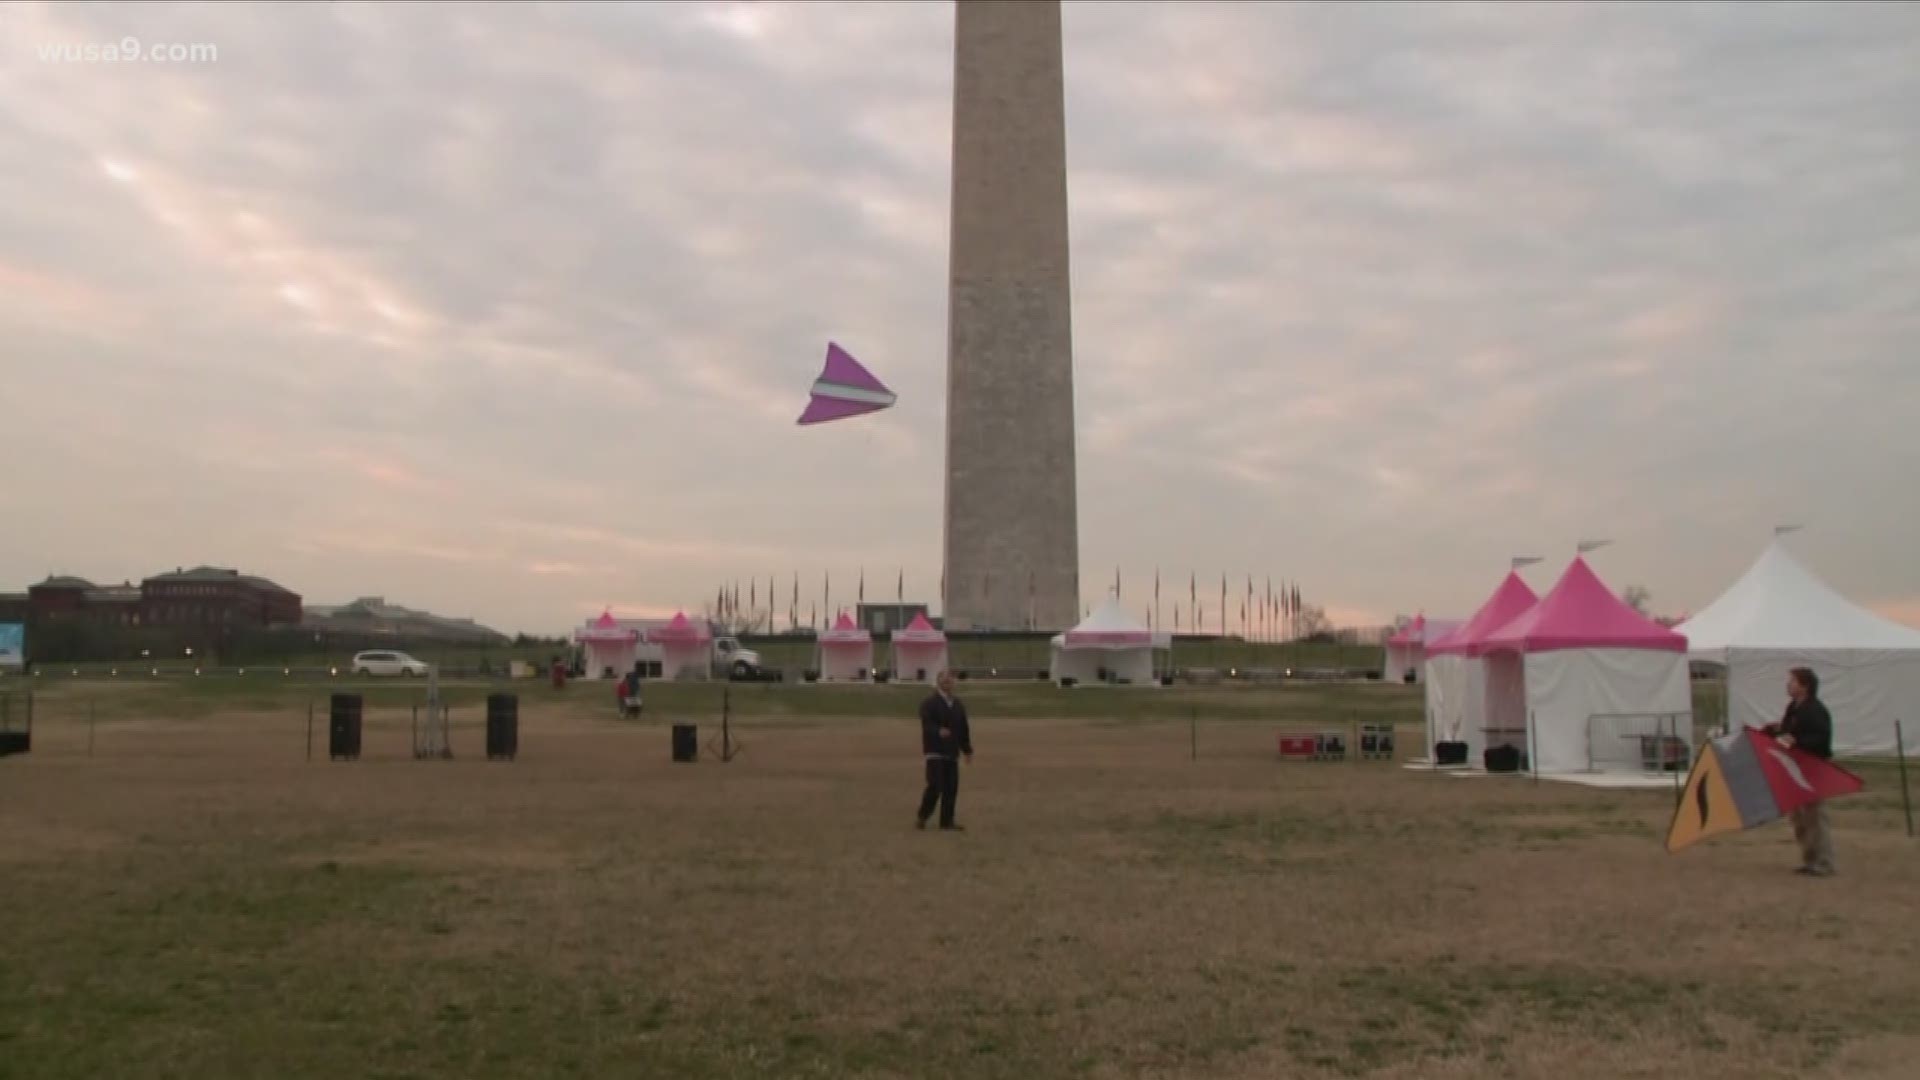 Over 35,000 people are expected to be flying kites at the Cherry Blossom Kite Festival.